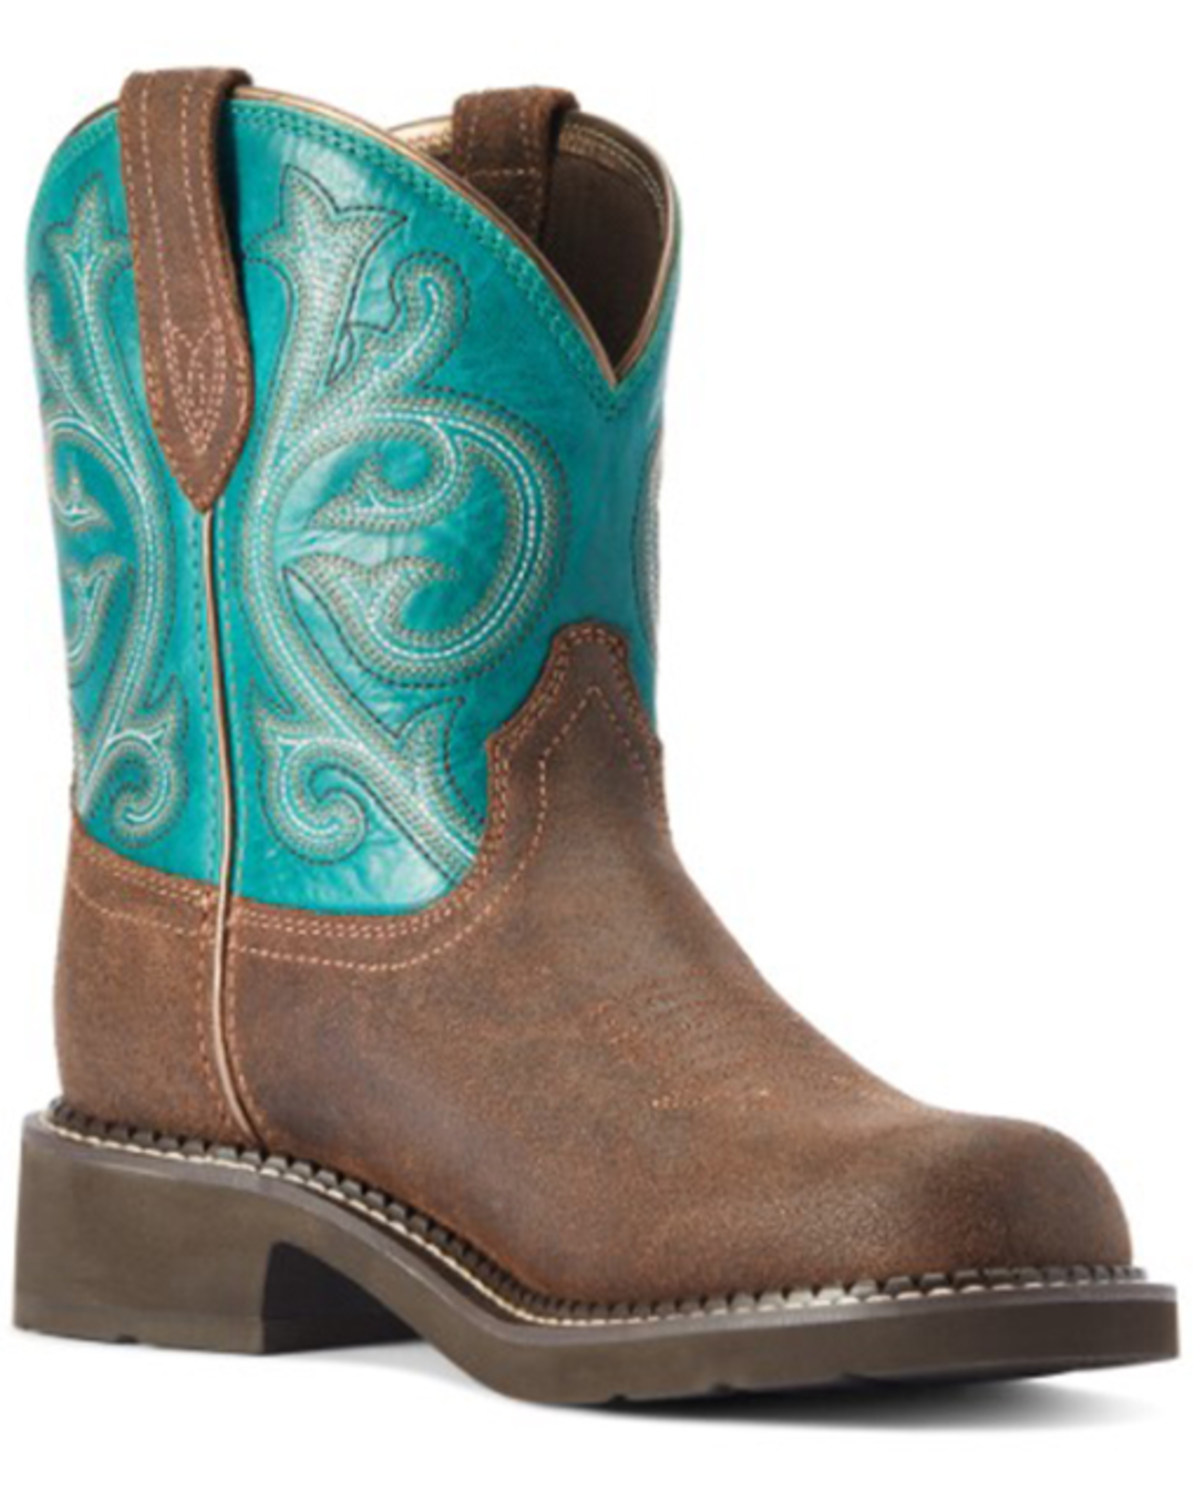 Ariat Women's Fatbaby Heritage Performance Western Boots - Round Toe